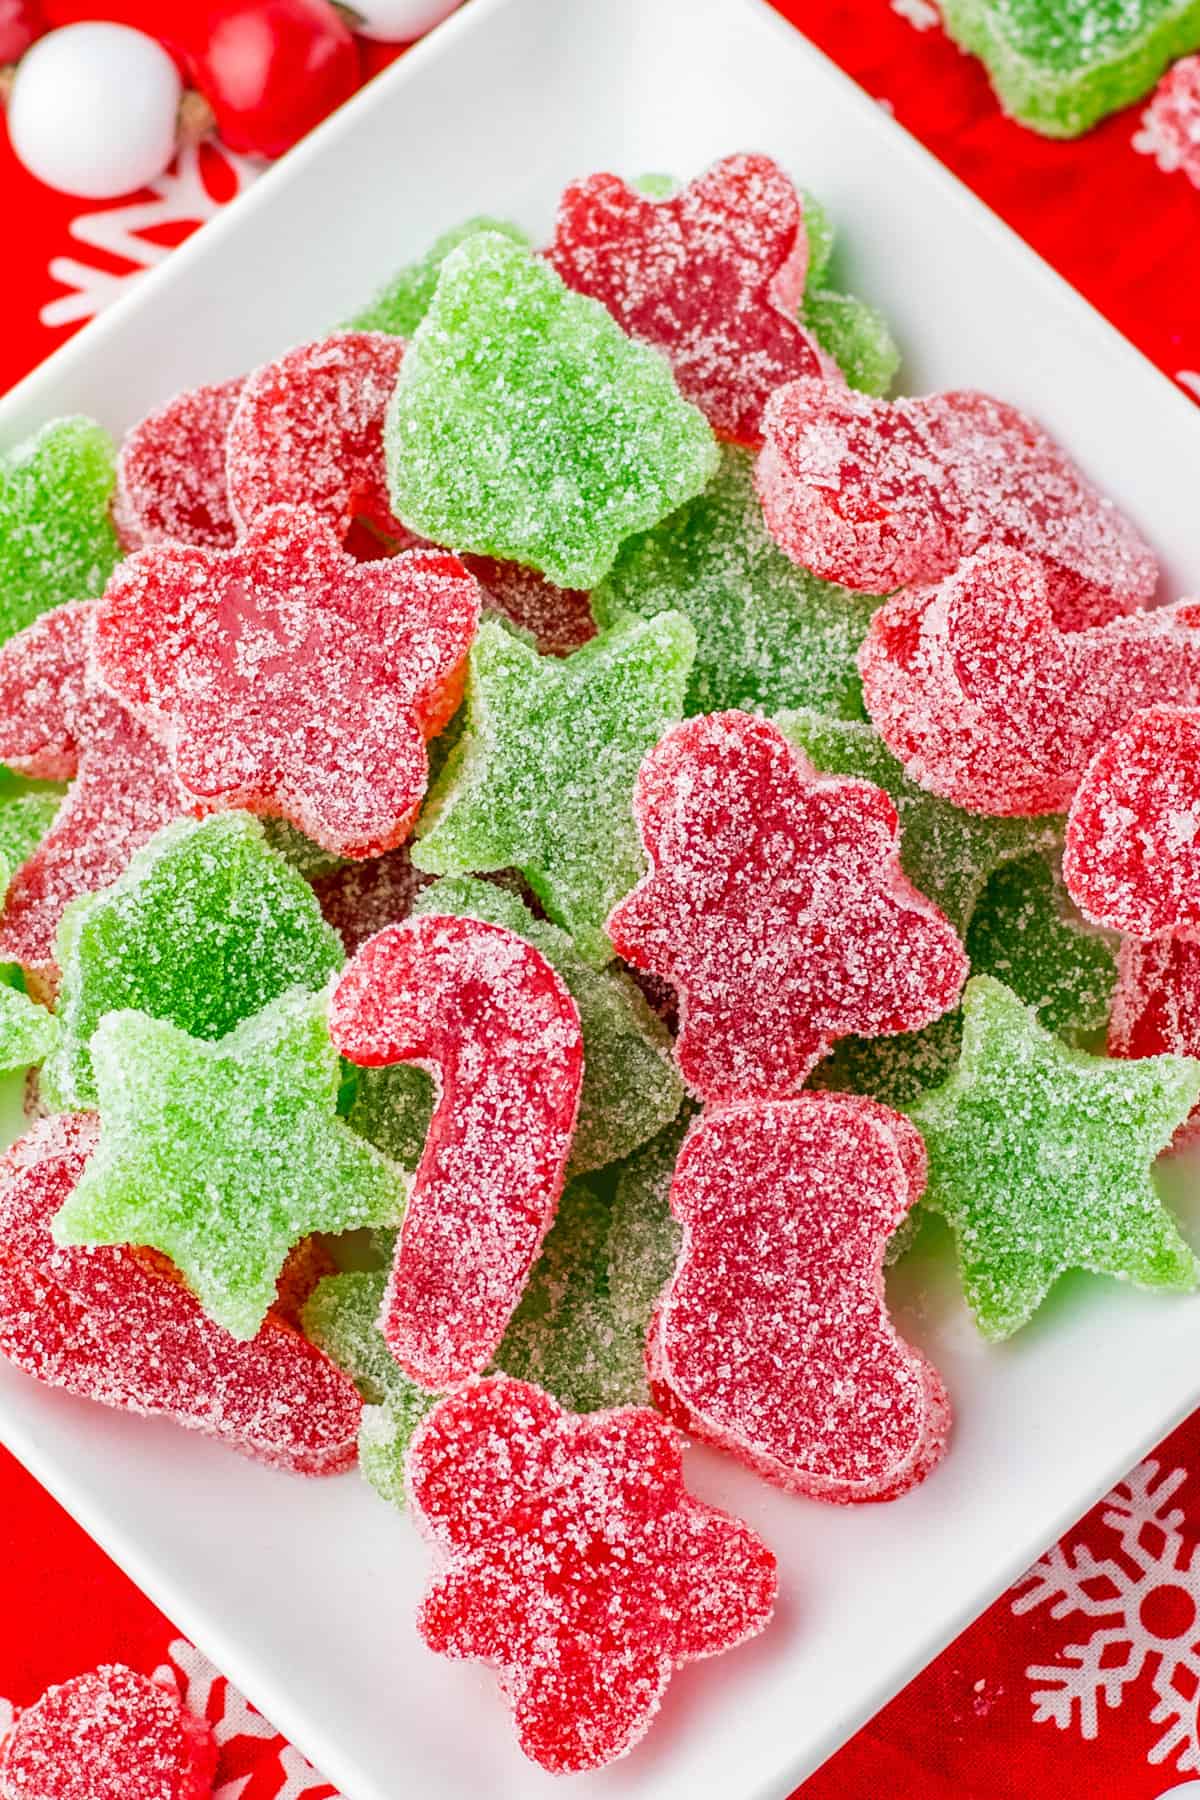 Red and green Christmas gumdrops cut into festive shapes piled on a white plate.